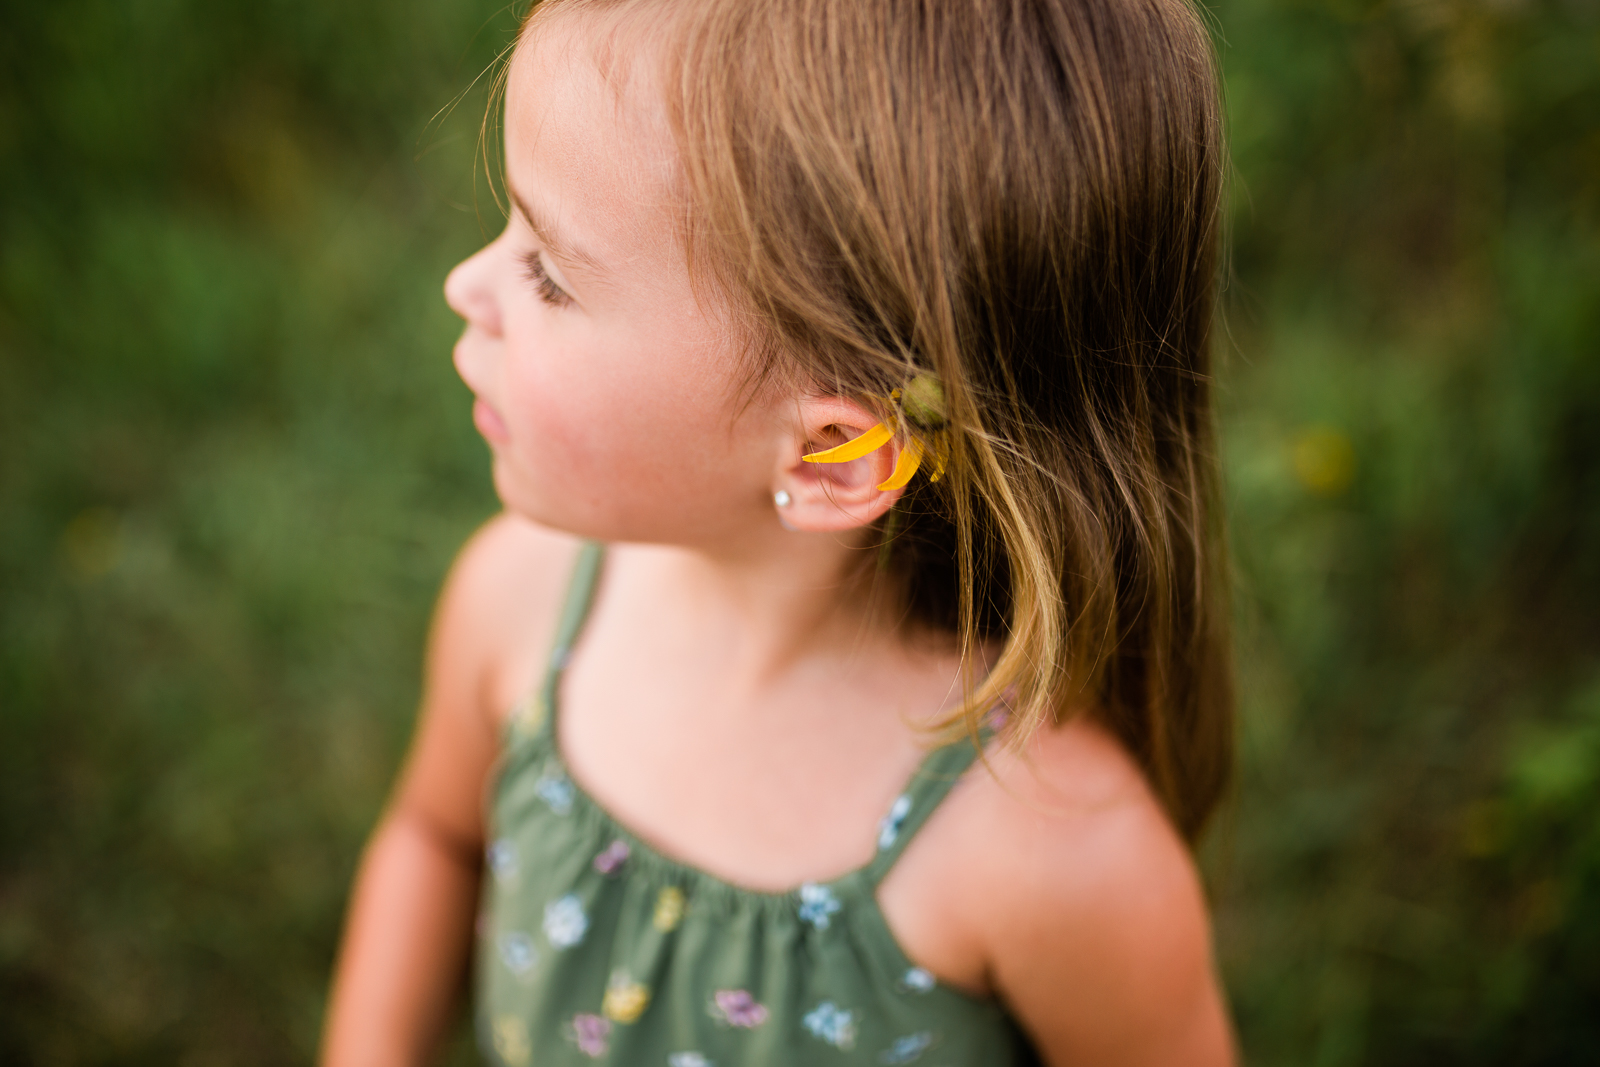  Close up portrait of a girl with a flower behind her ears, mommy and me session at Shawnee Mission Park, Kansas City candid children's portrait photographer 